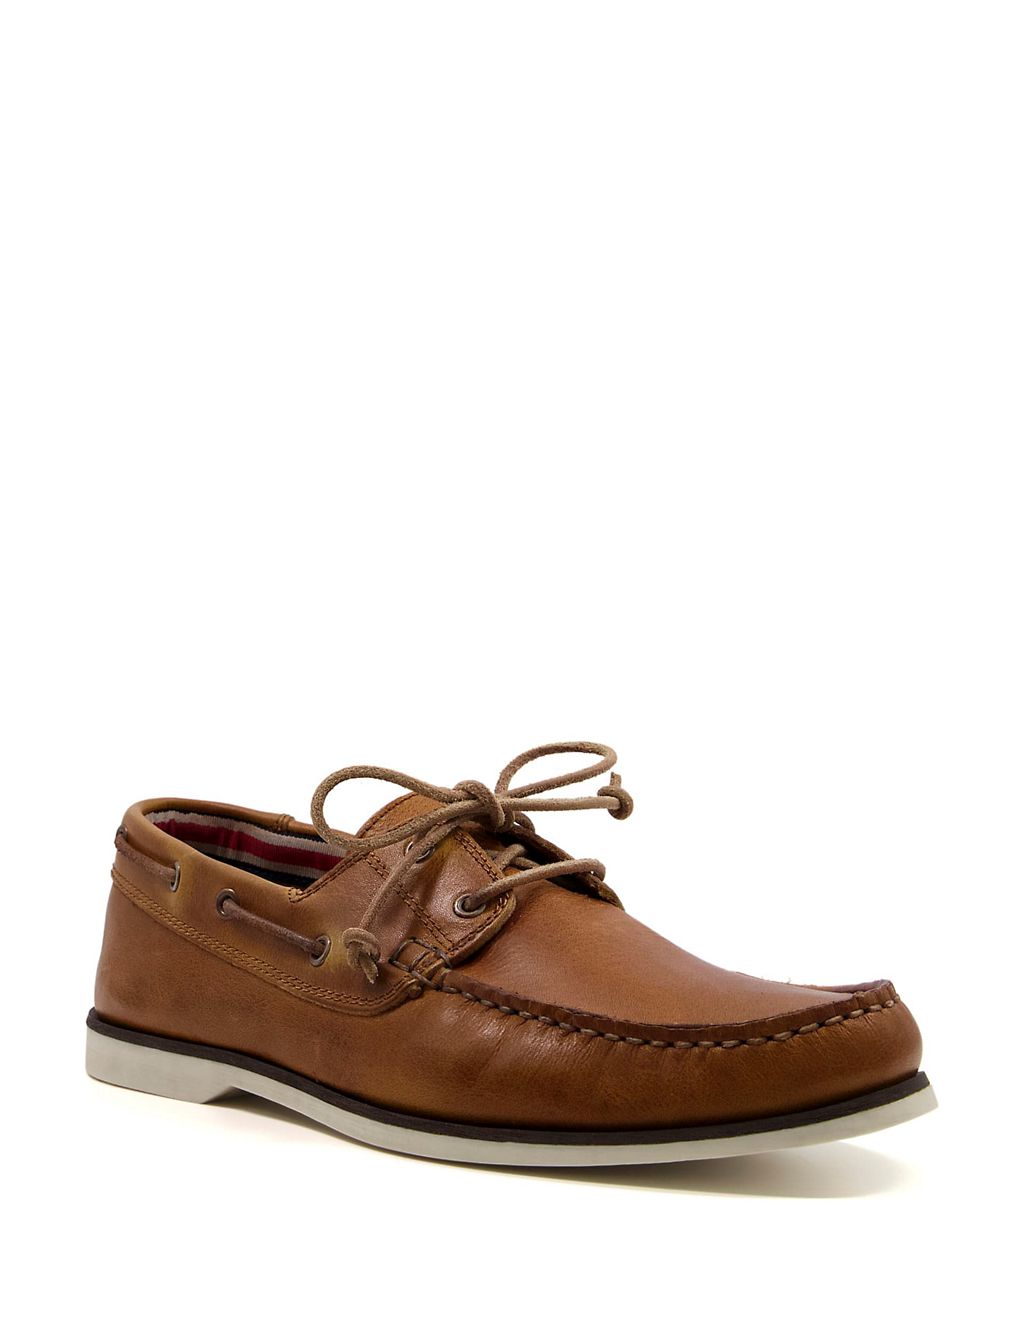 Leather Slip-On Boat Shoes | Dune London | M&S